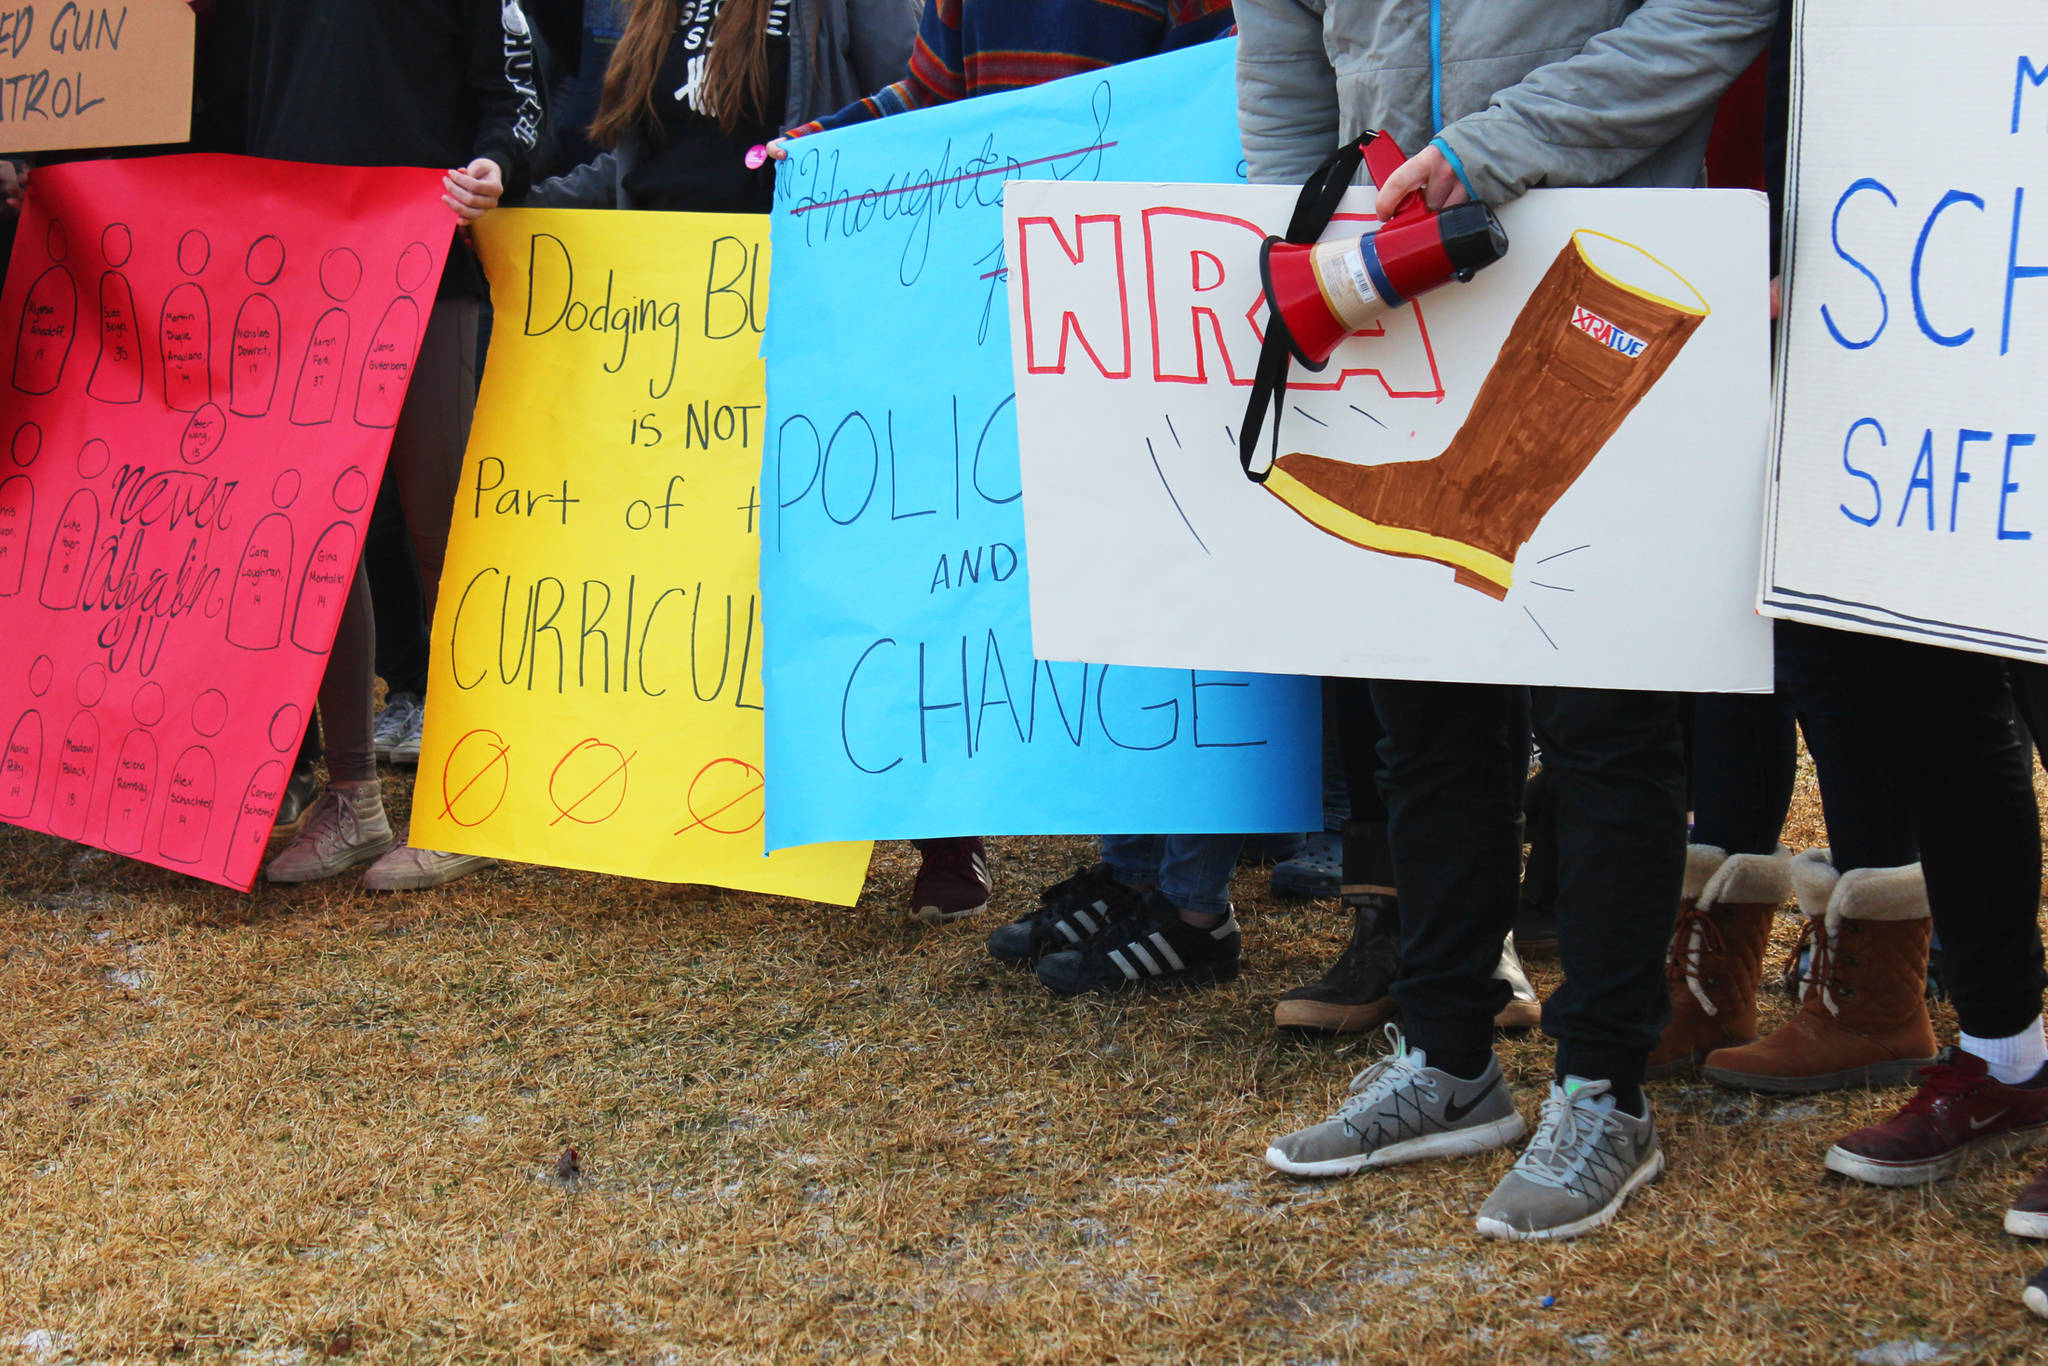 Homer High School students stand in a group with signs advocating for safer schools and stricter gun laws during a walkout staged at noon Wednesday, Feb. 21, 2018 at the school in Homer, Alaska. (Photo by Megan Pacer/Homer News)